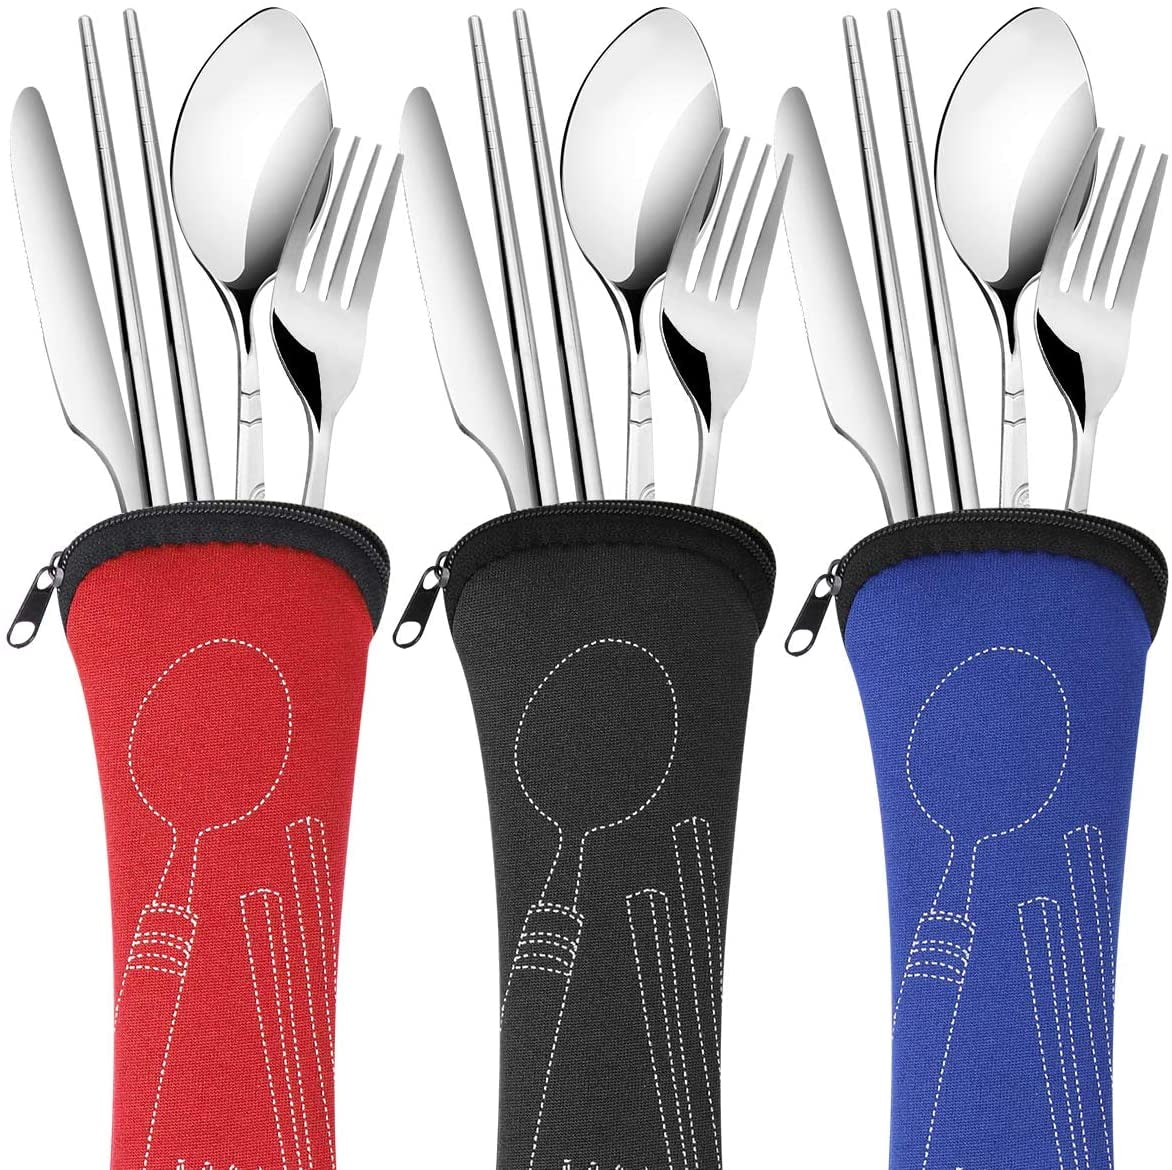 ArderLive 3 PCS Outdoor Flatware Set with Case, Fork Spoon Knife/Travel Set  for Travel, Lunch Box and Camping, father's day gifts, Blue